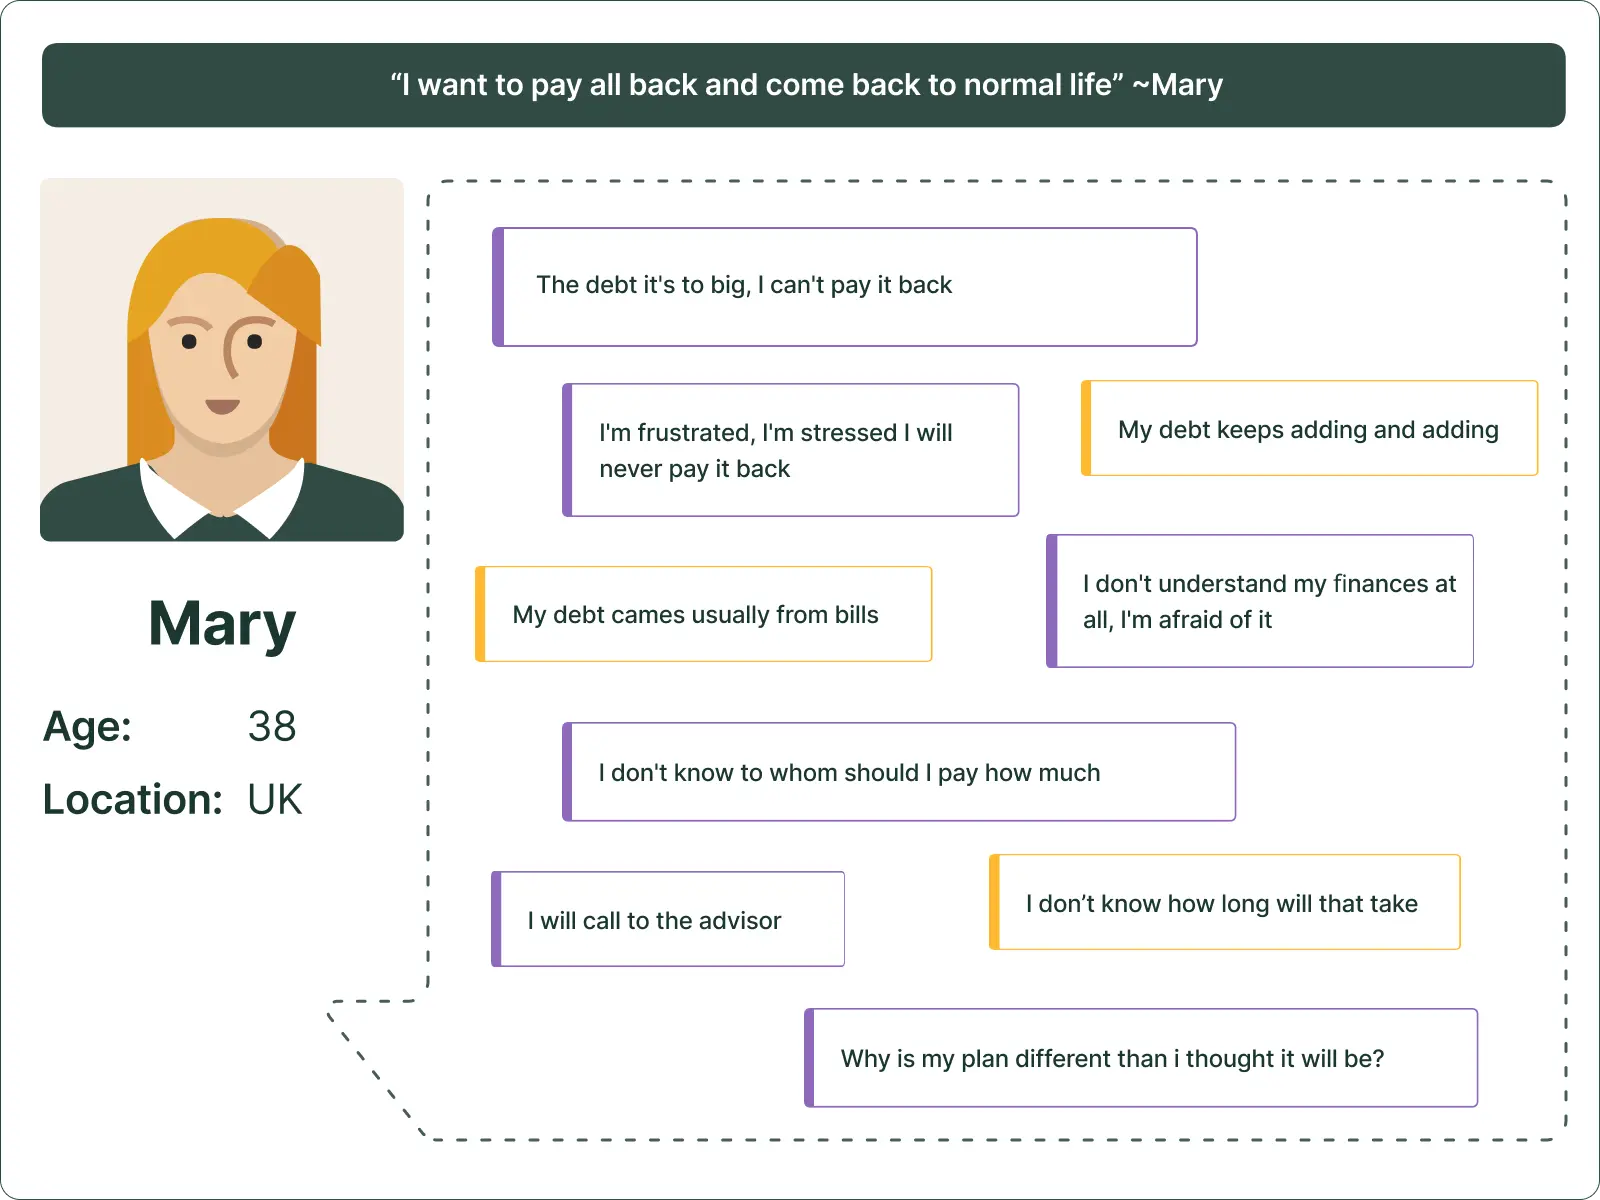 A matrix showing Cerebreon's user persona: 38-year-old Mary from the UK who wants to pay all their debt back, but is stressed, frustrated, and needs advisor help.